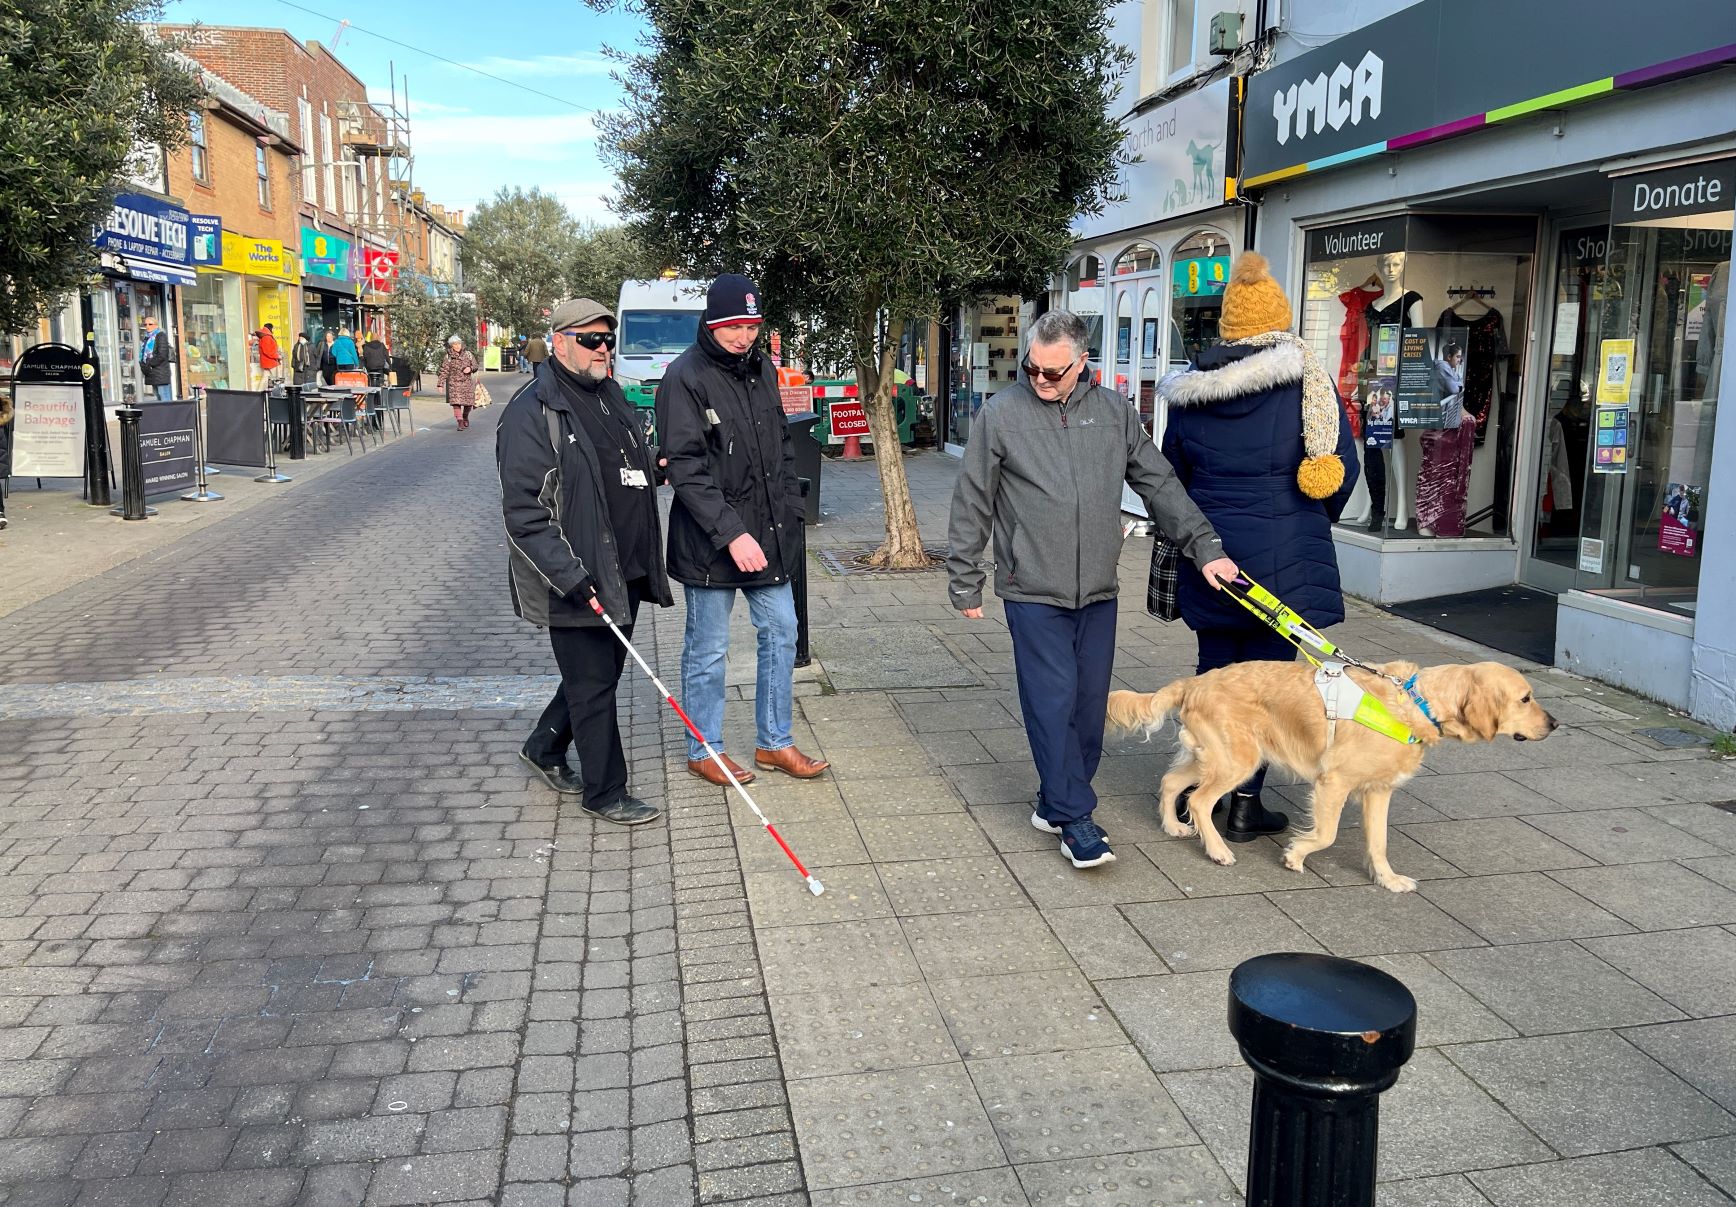 SLC member Graham and guide dog teddy, are with two attendees. One is wearing sim specs and walking with a cane, the other is guiding him. They are crossing a street lined with shops.